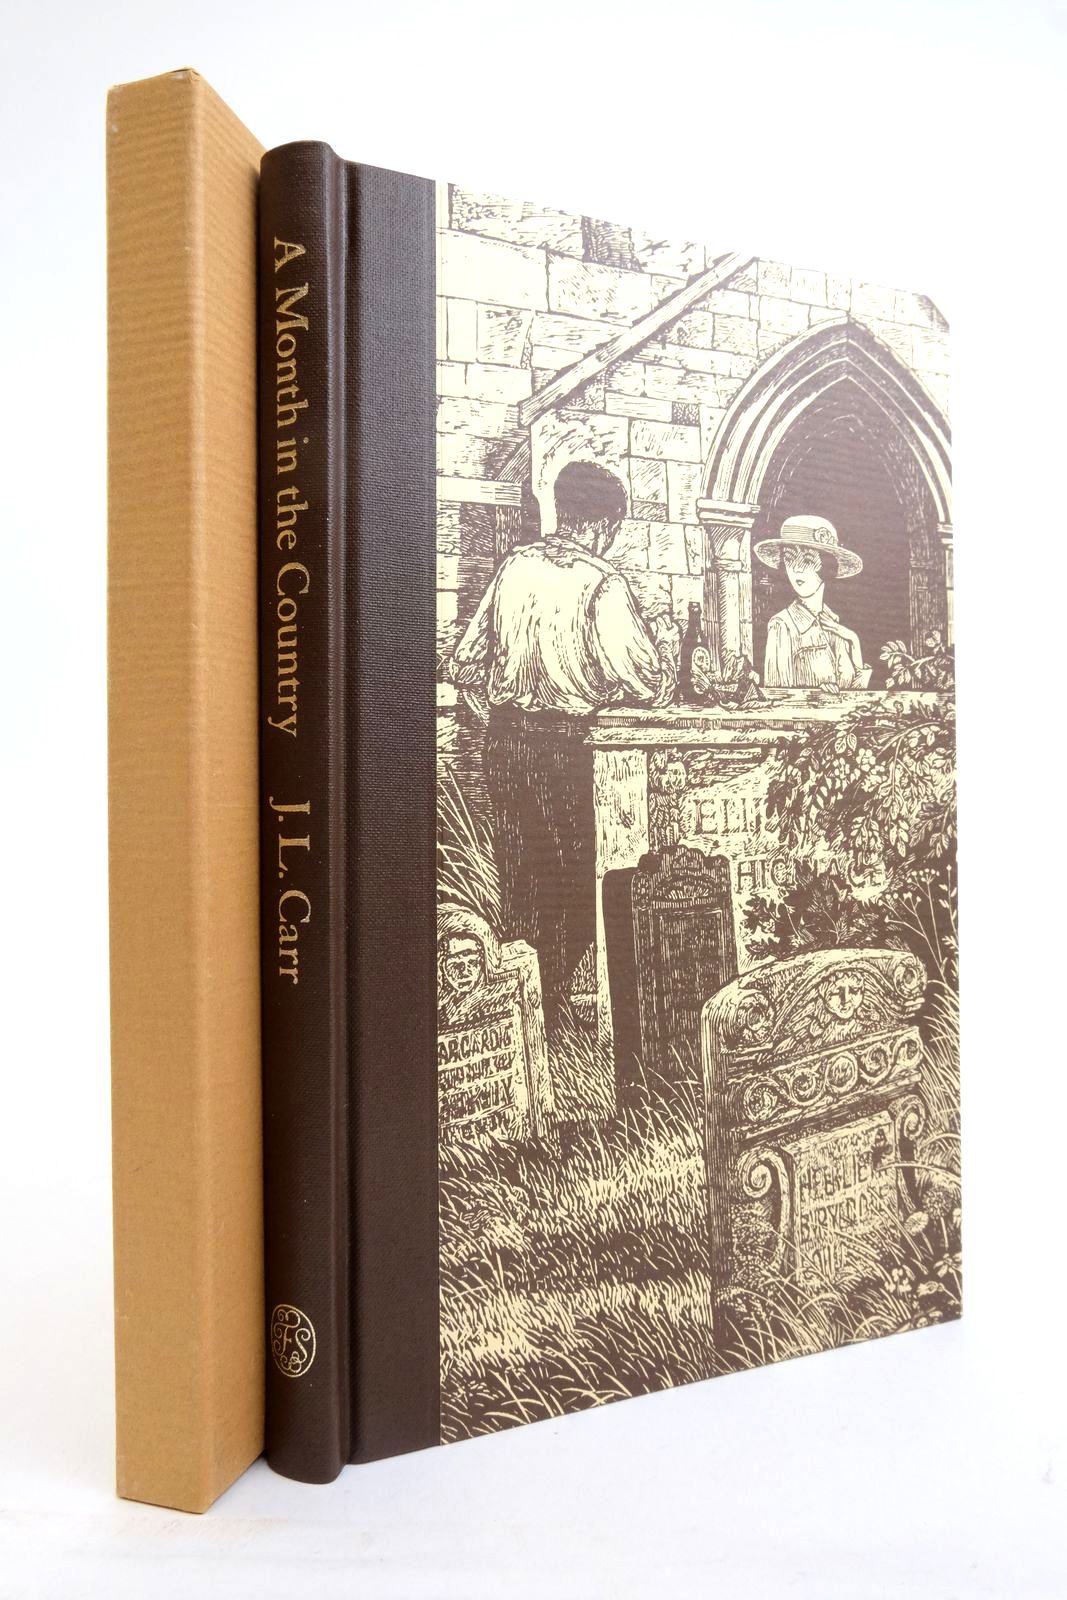 Photo of A MONTH IN THE COUNTRY written by Carr, J.L. Blythe, Ronald illustrated by Stephens, Ian published by Folio Society (STOCK CODE: 2136533)  for sale by Stella & Rose's Books